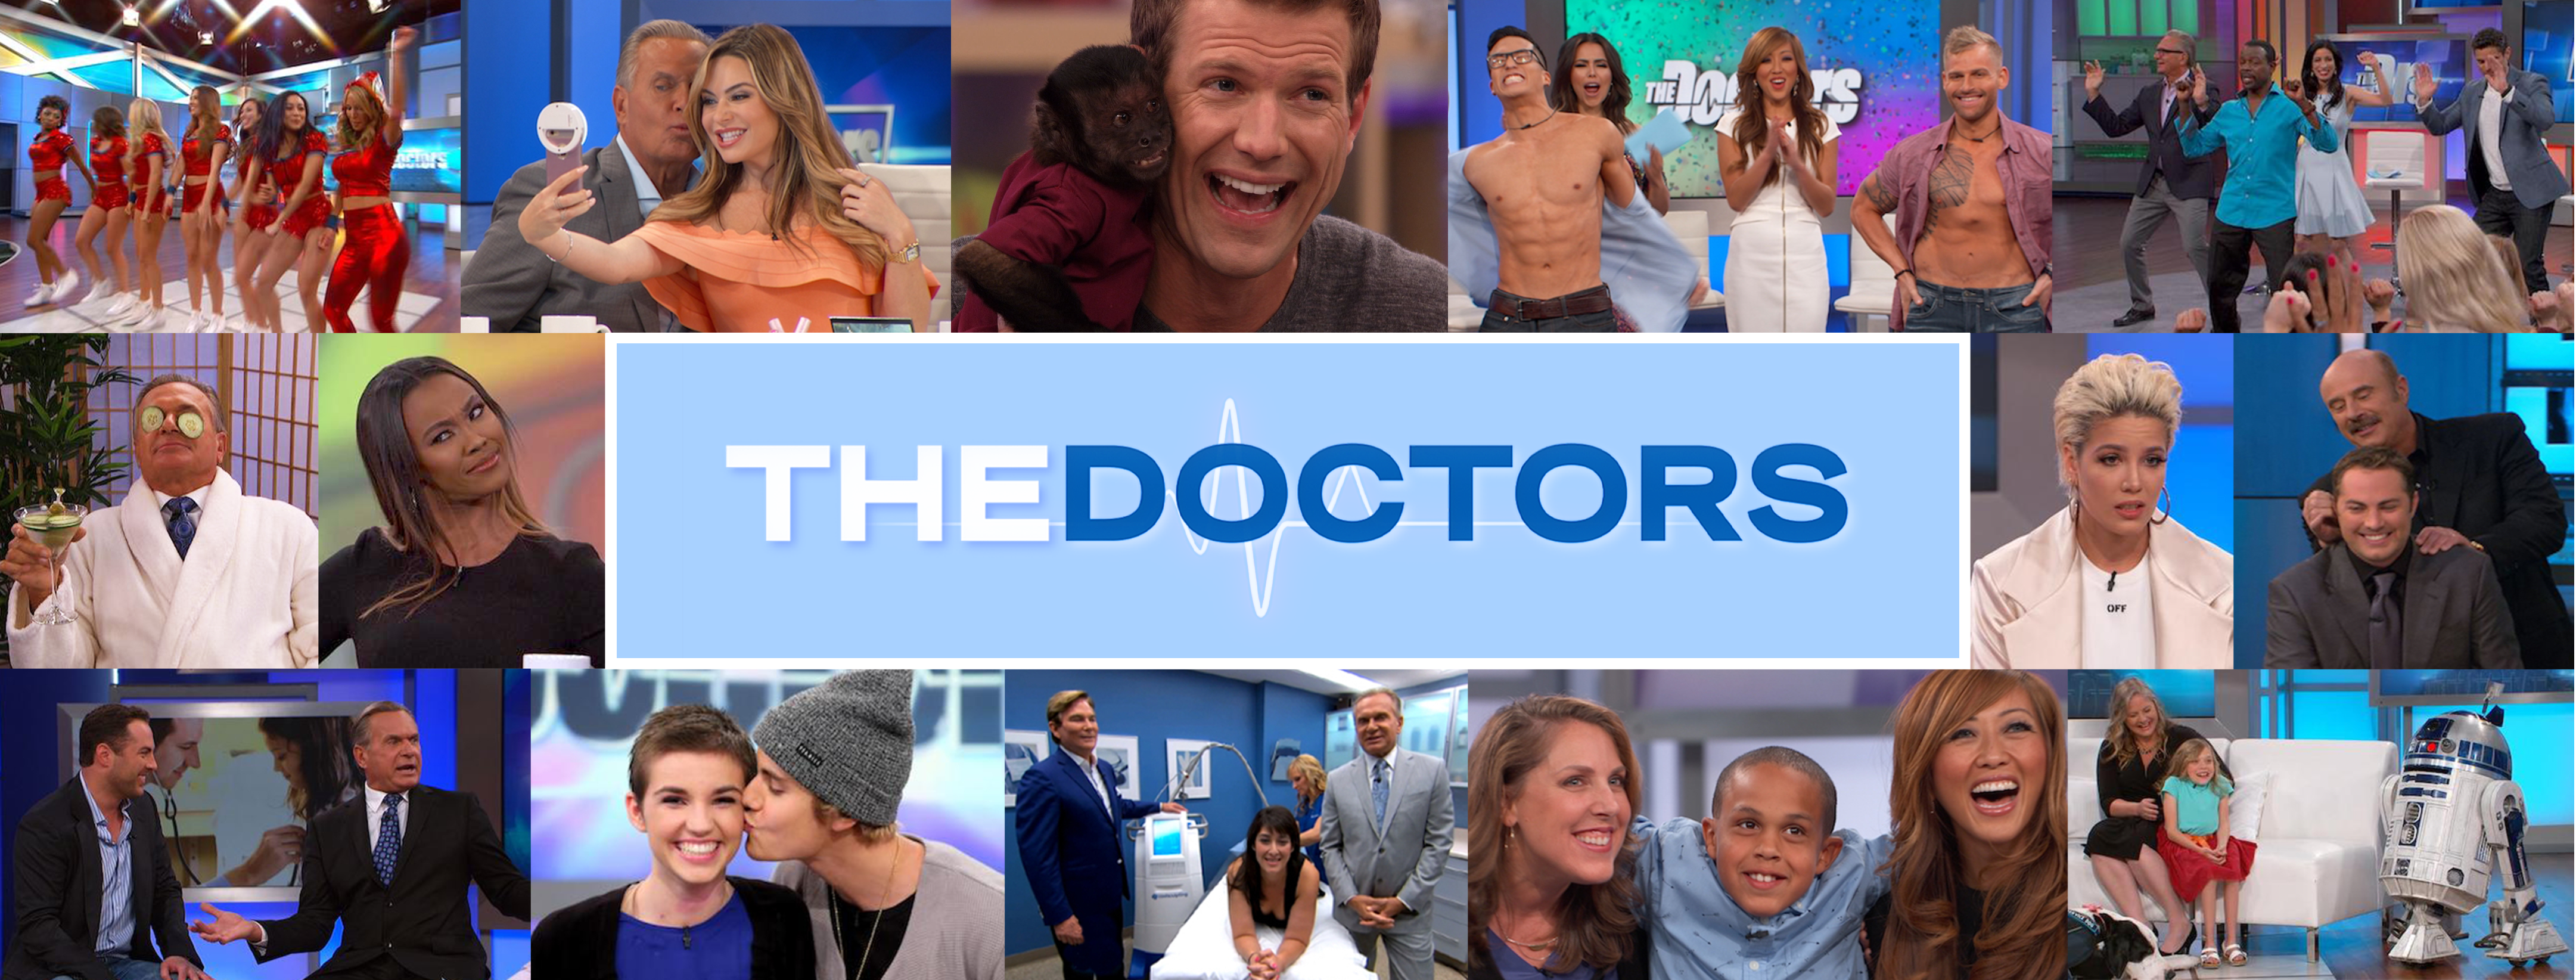 Guests on The Doctors' stage